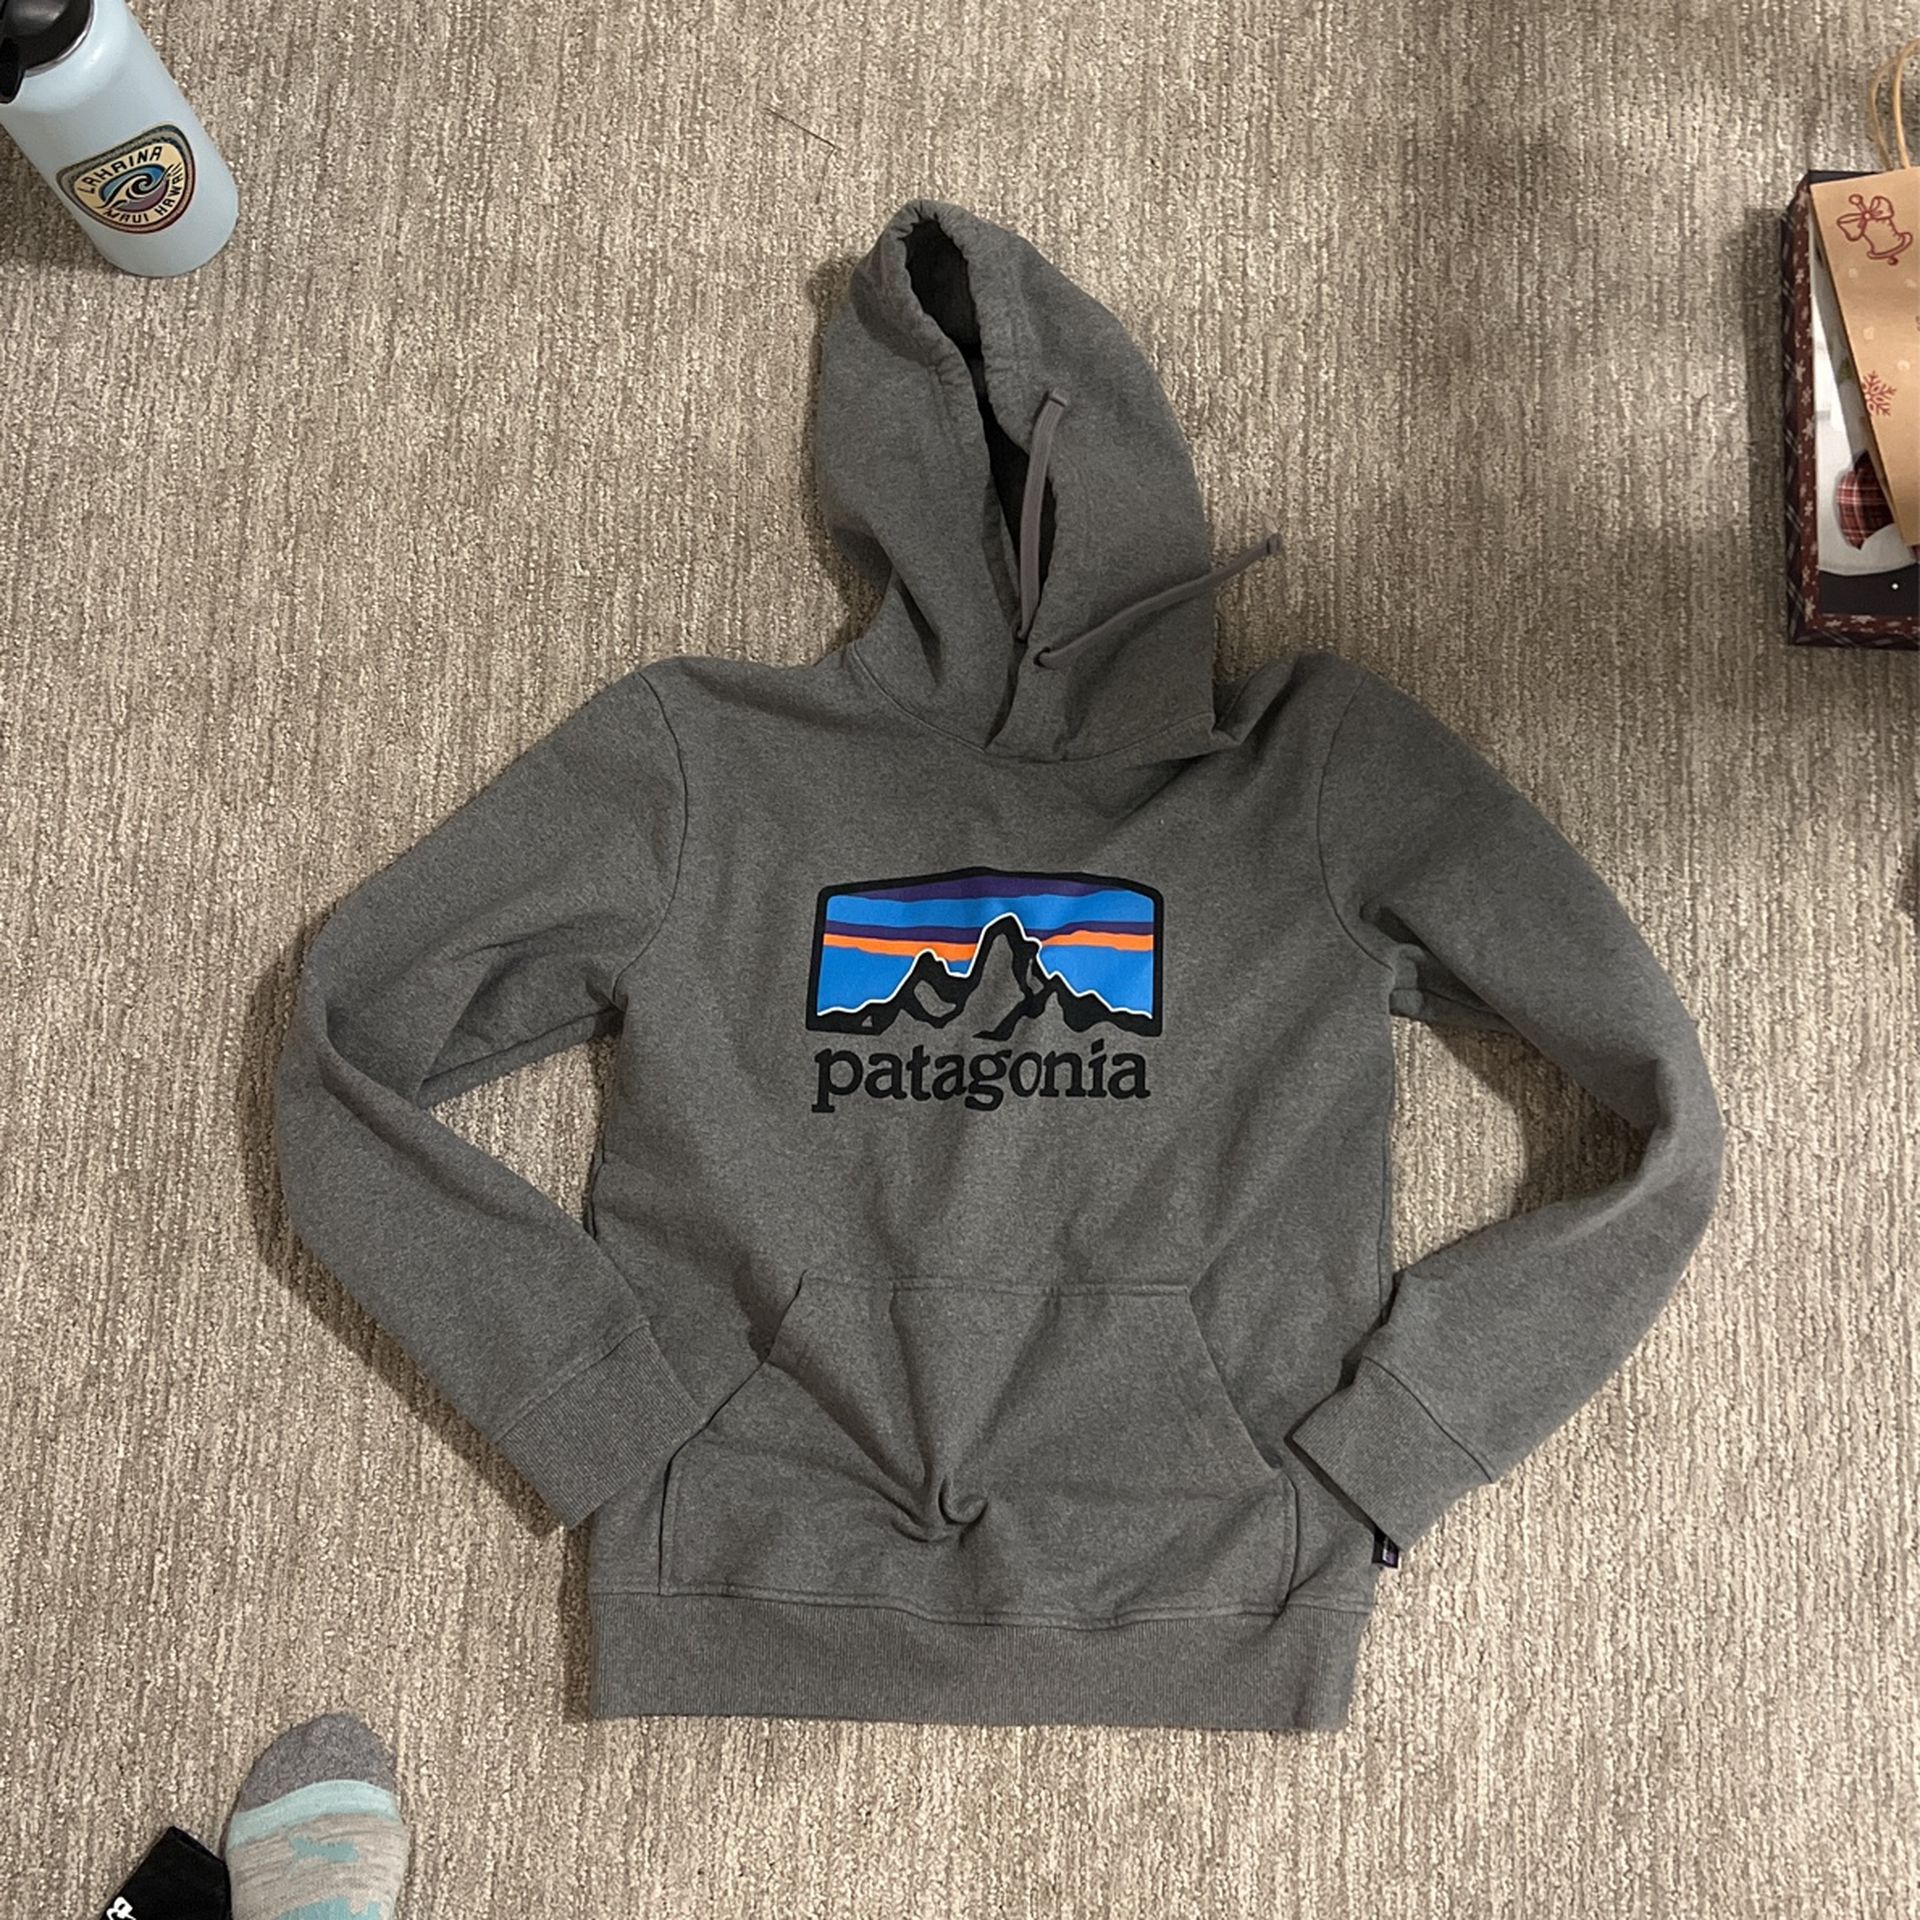 Patagonia hoodie- Men’s Small. THICK!!